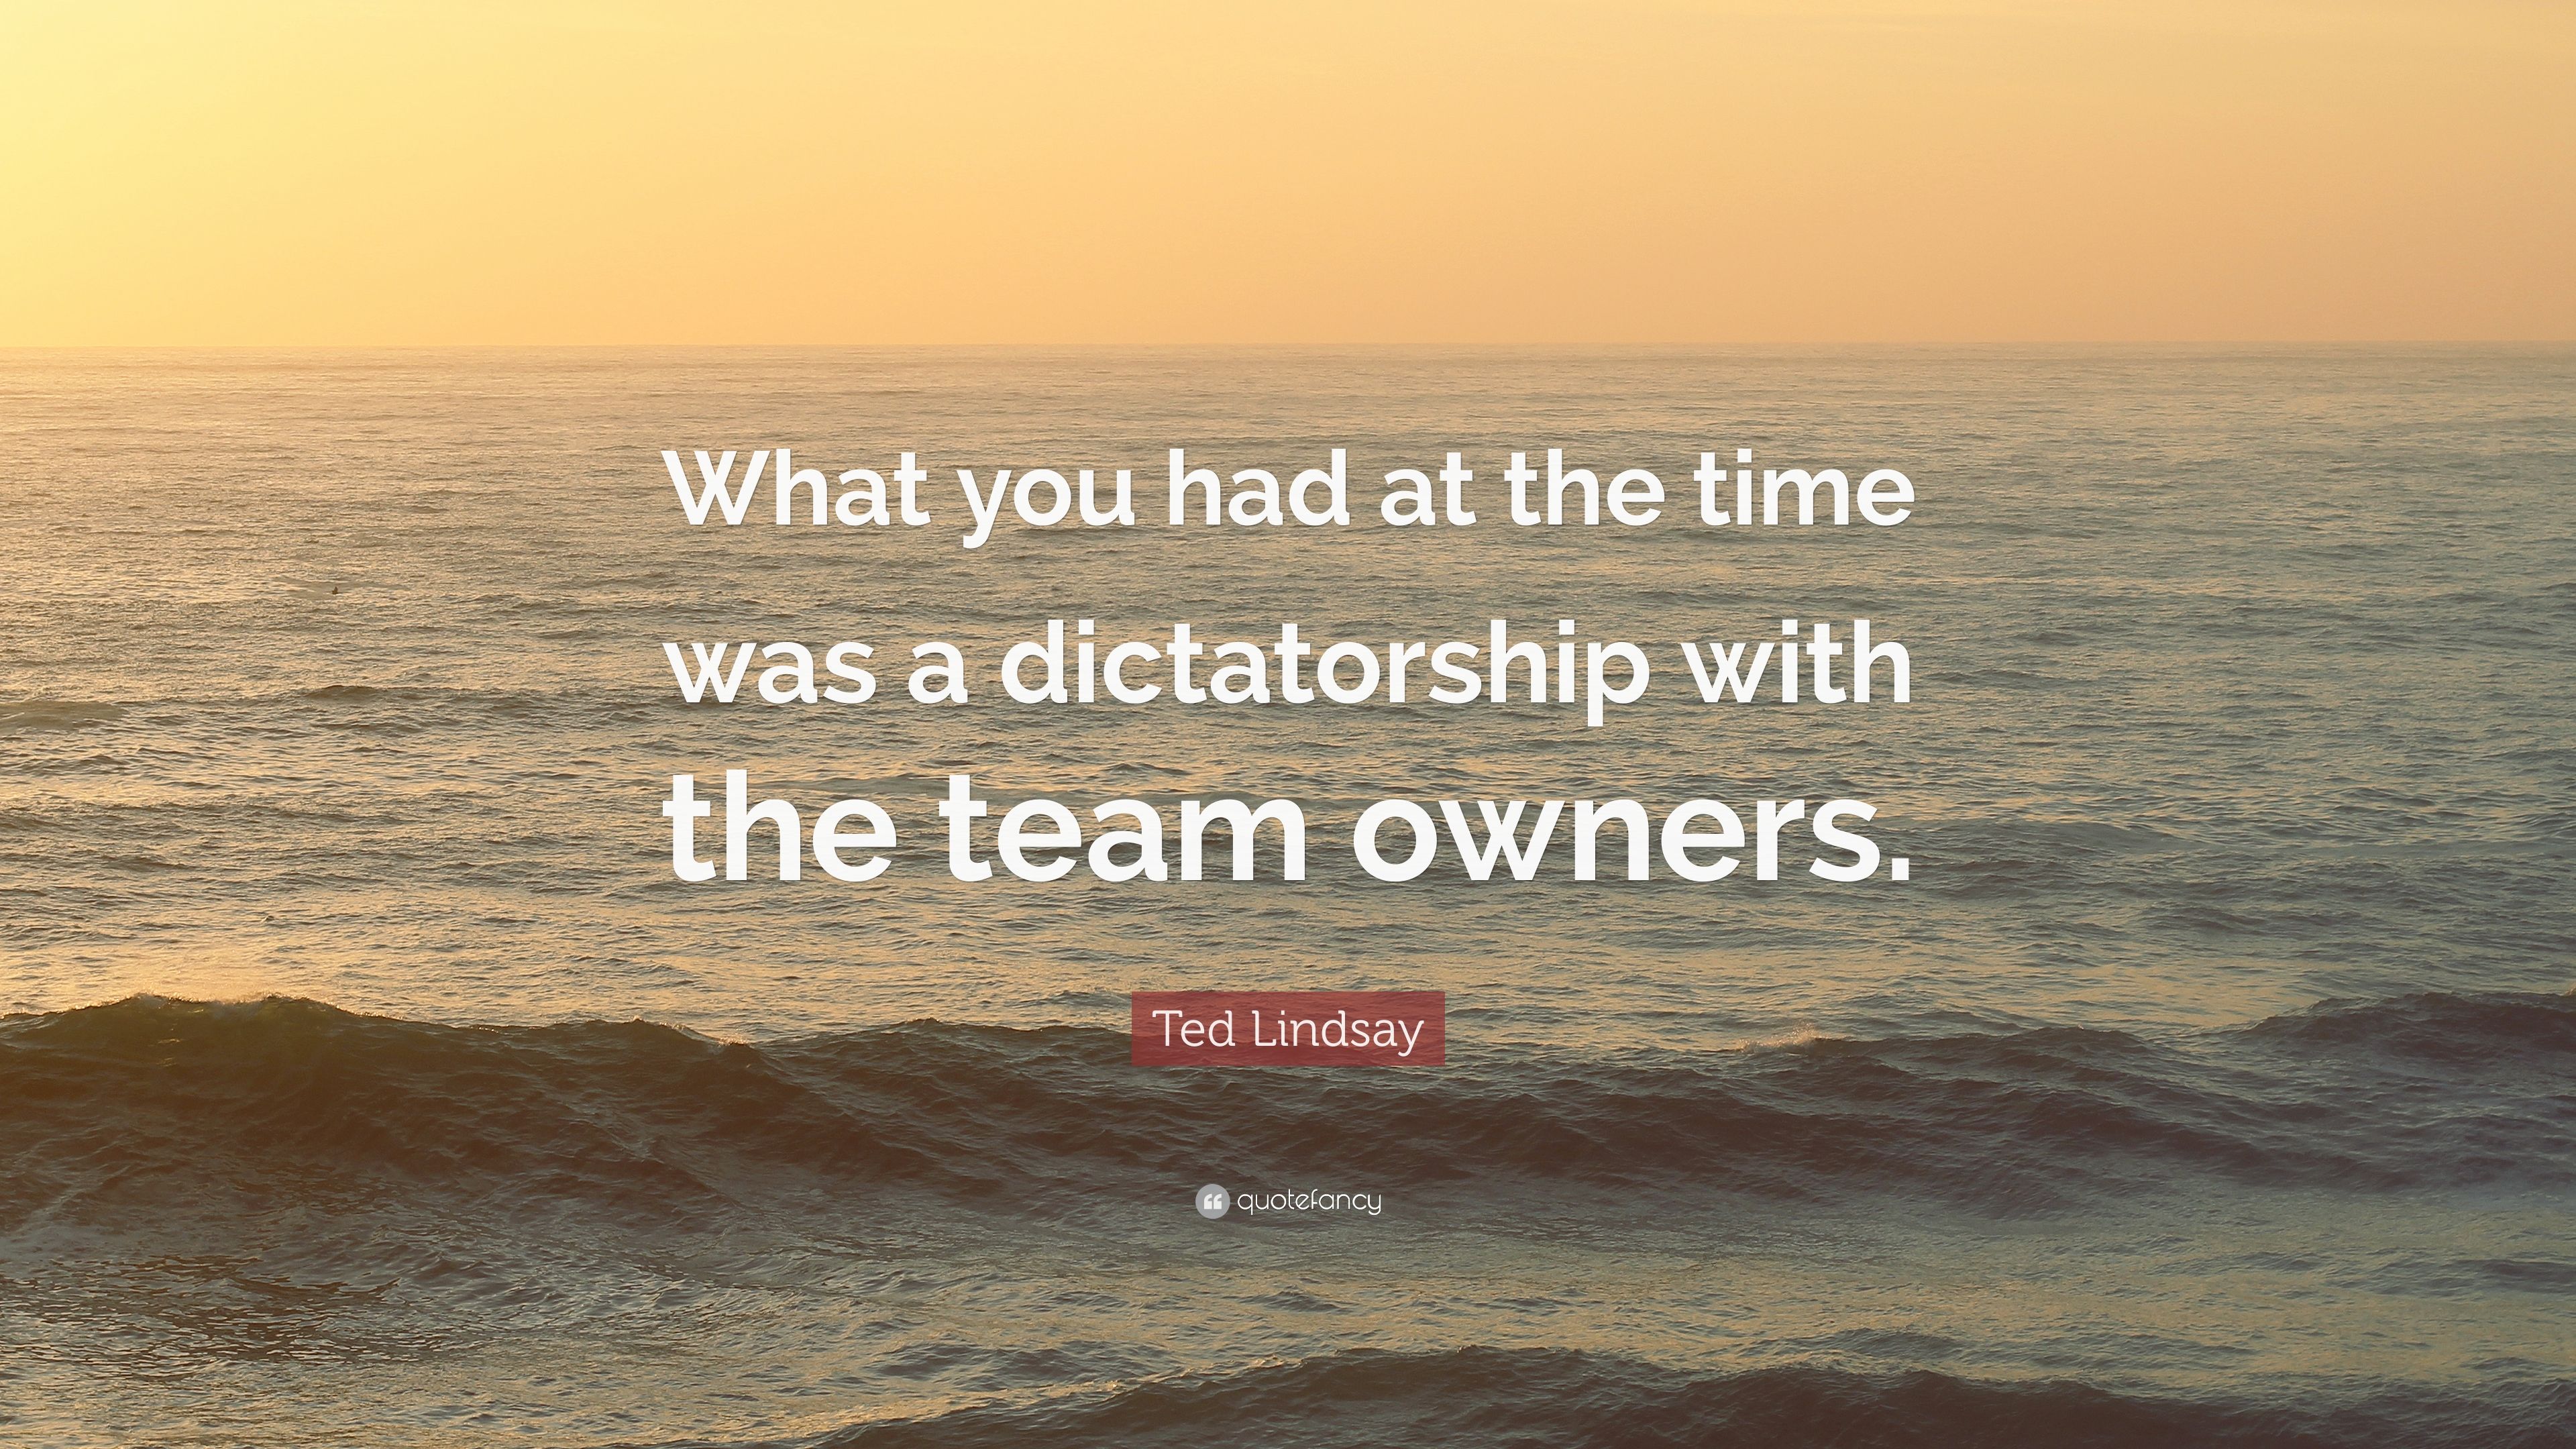 Ted Lindsay Quote: “What you had at the time was a dictatorship